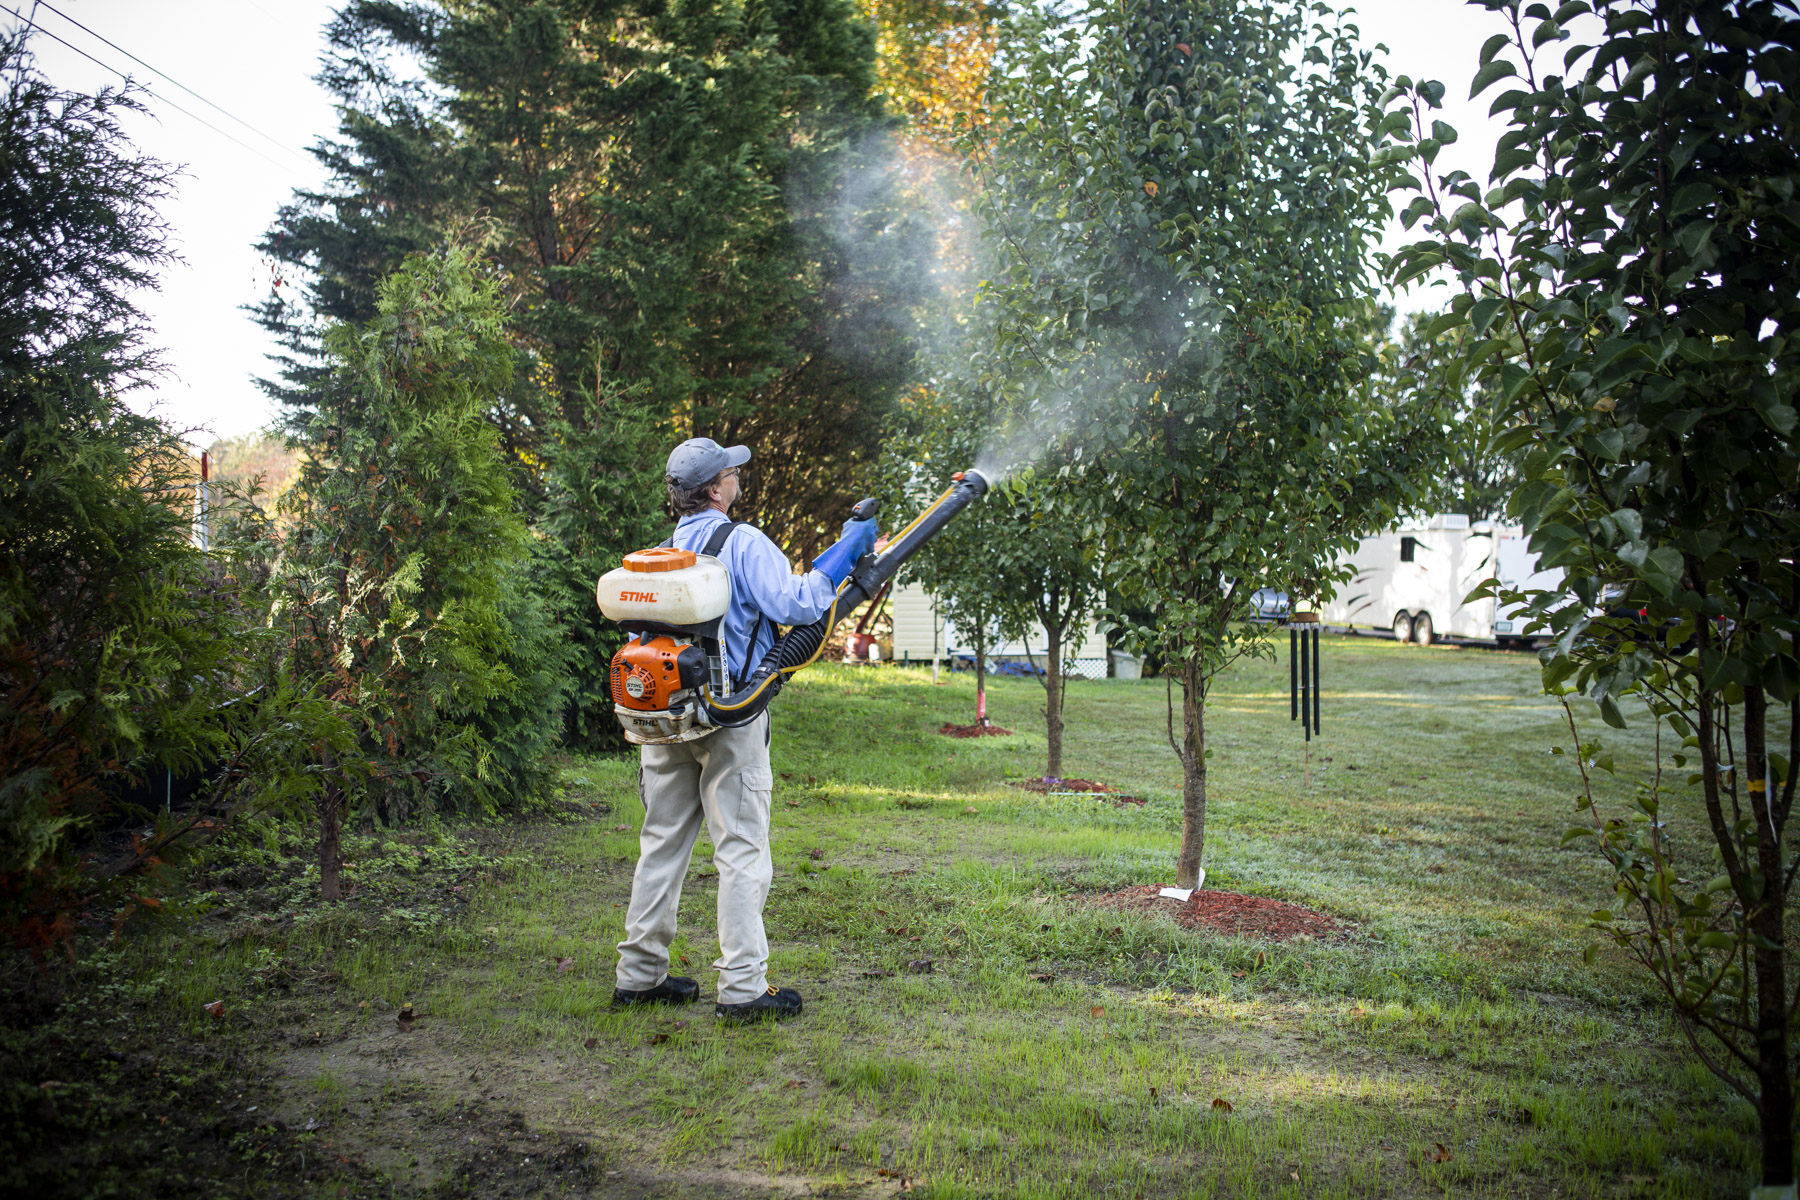 mosquito control spray in trees